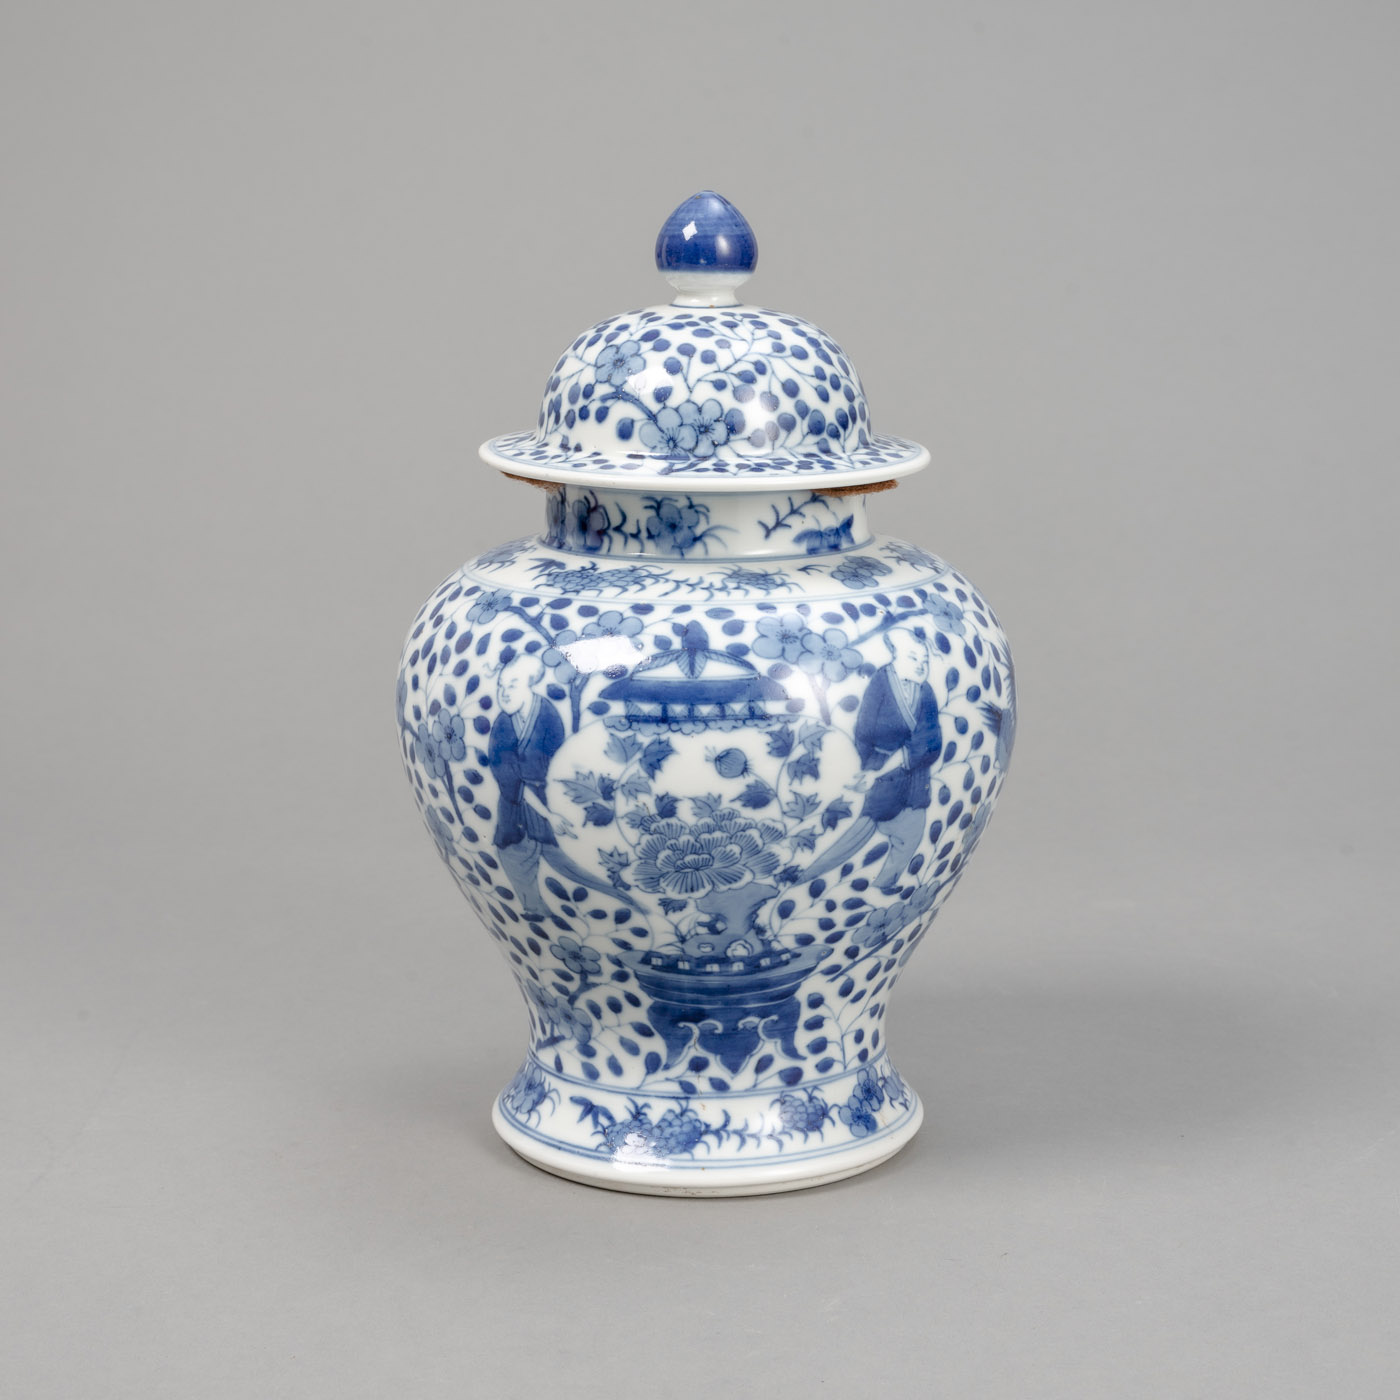 <b>A BLUE AND WHITE FIGURAL AND FLORAL PORCELAIN VASE AND COVER</b>